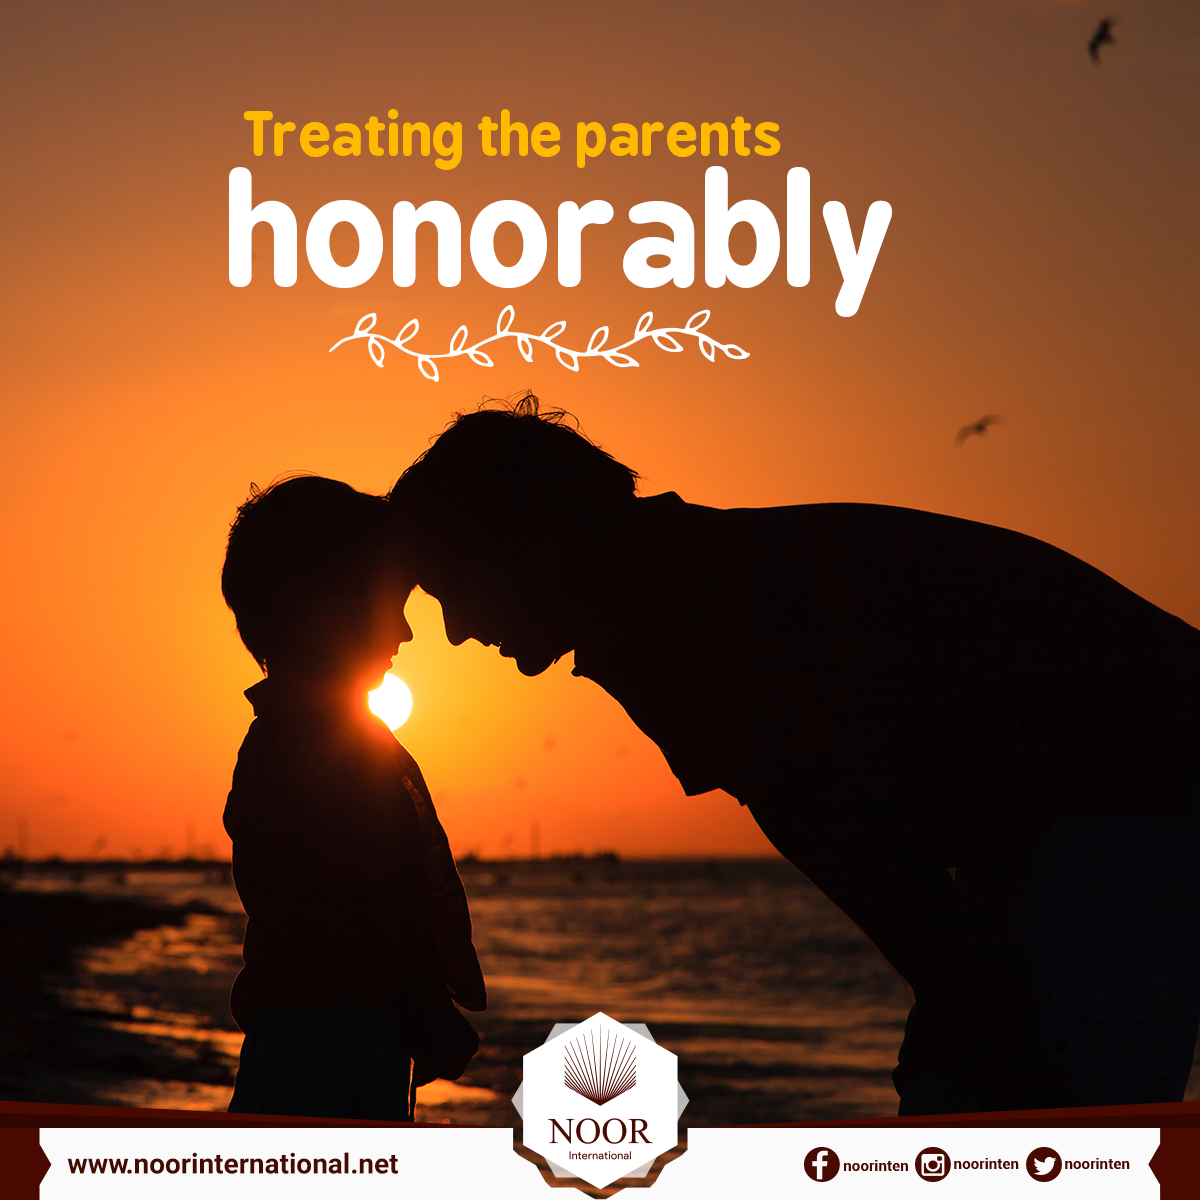 Treating the parents honorably